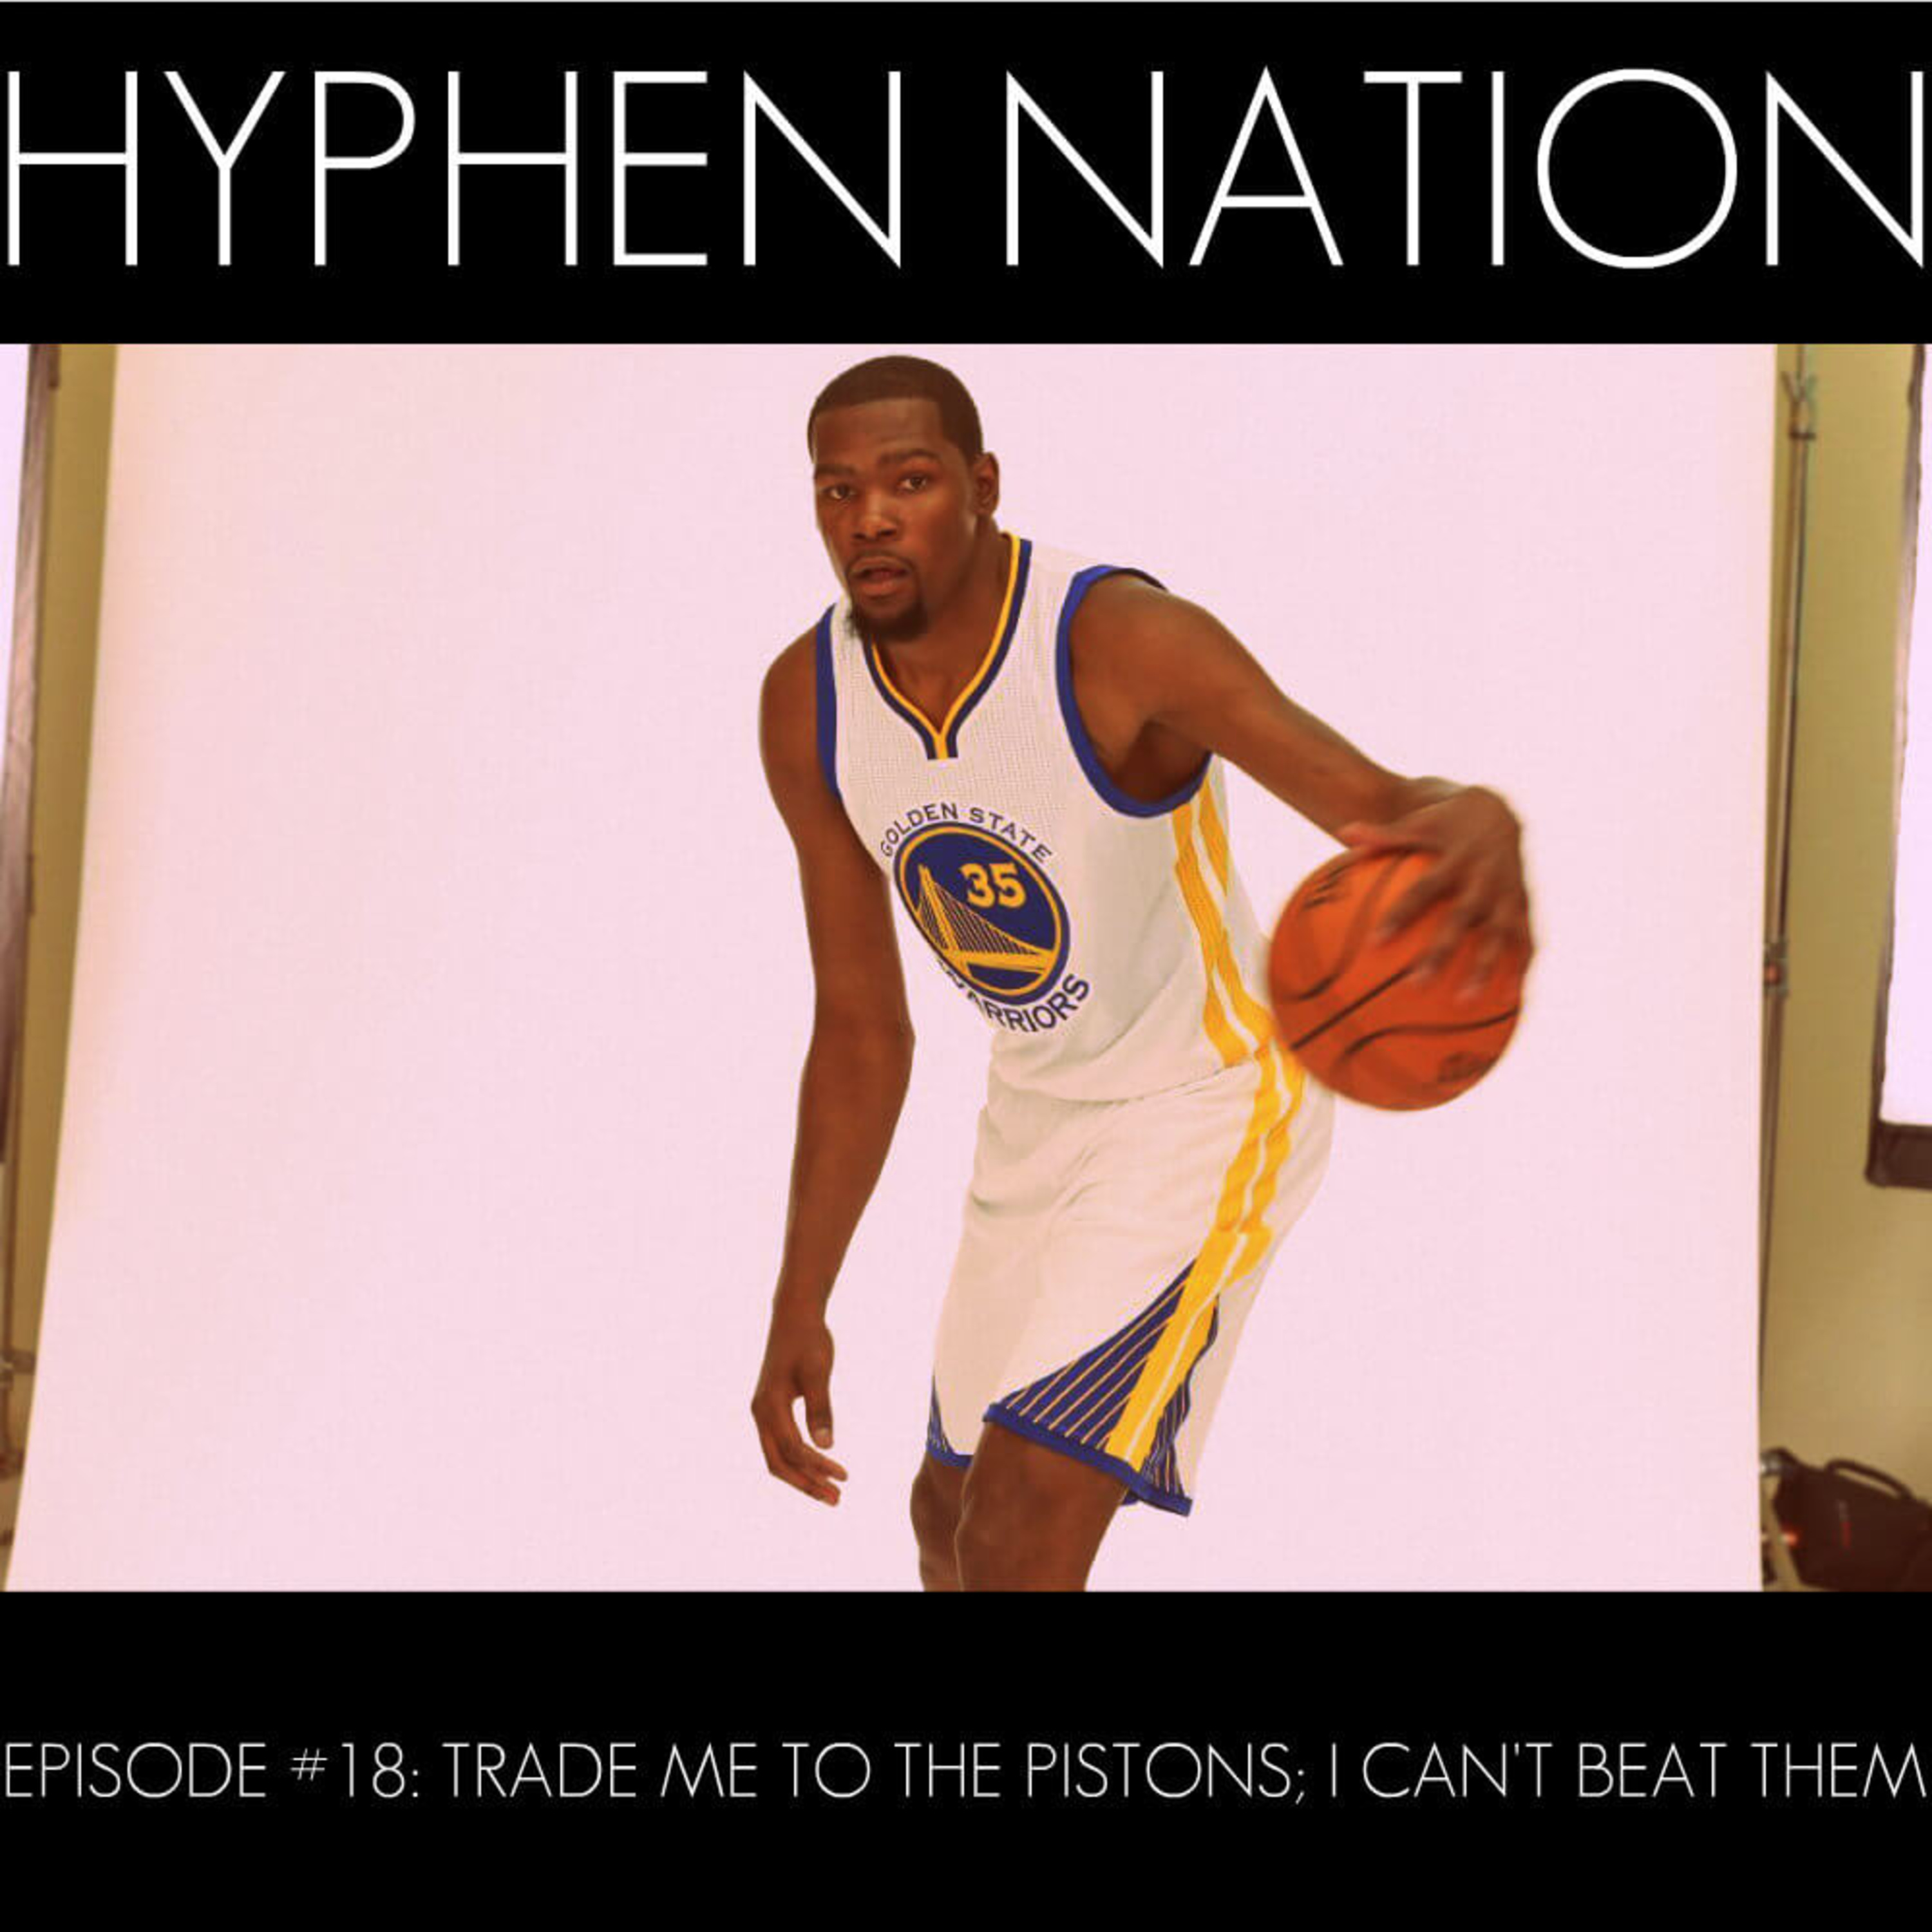 Episode #18: Trade Me To The Pistons; I Can’t Beat Them